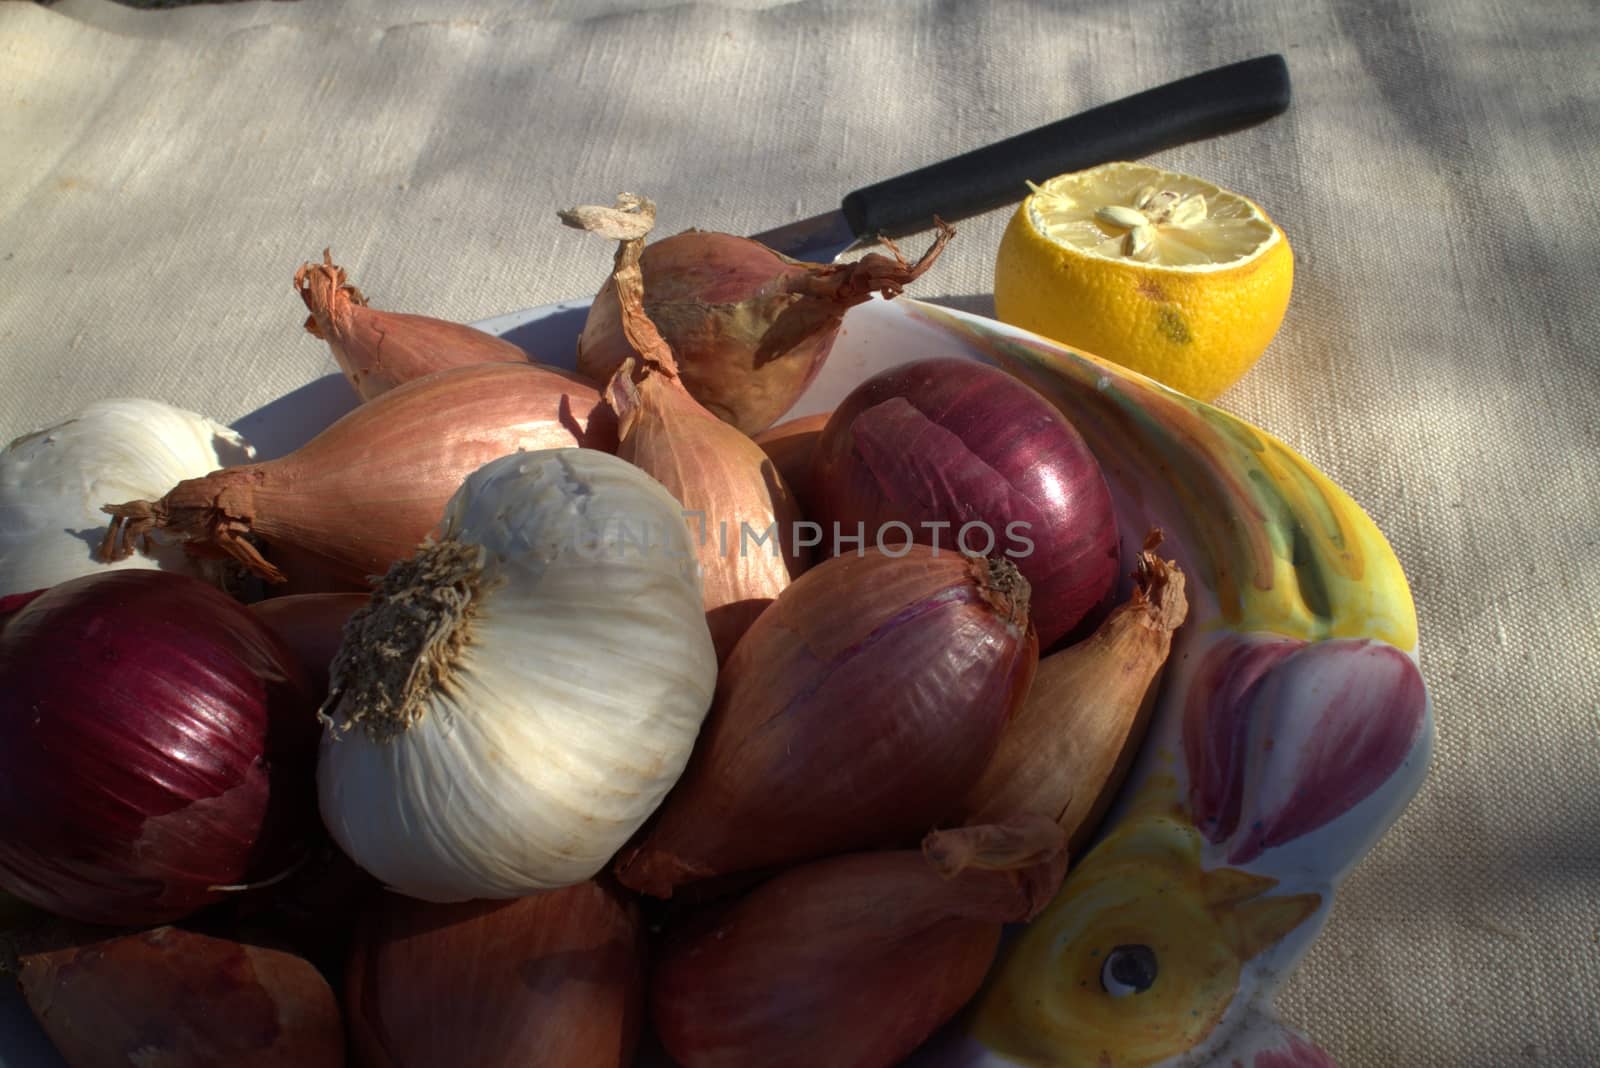 Onions by tozzimr